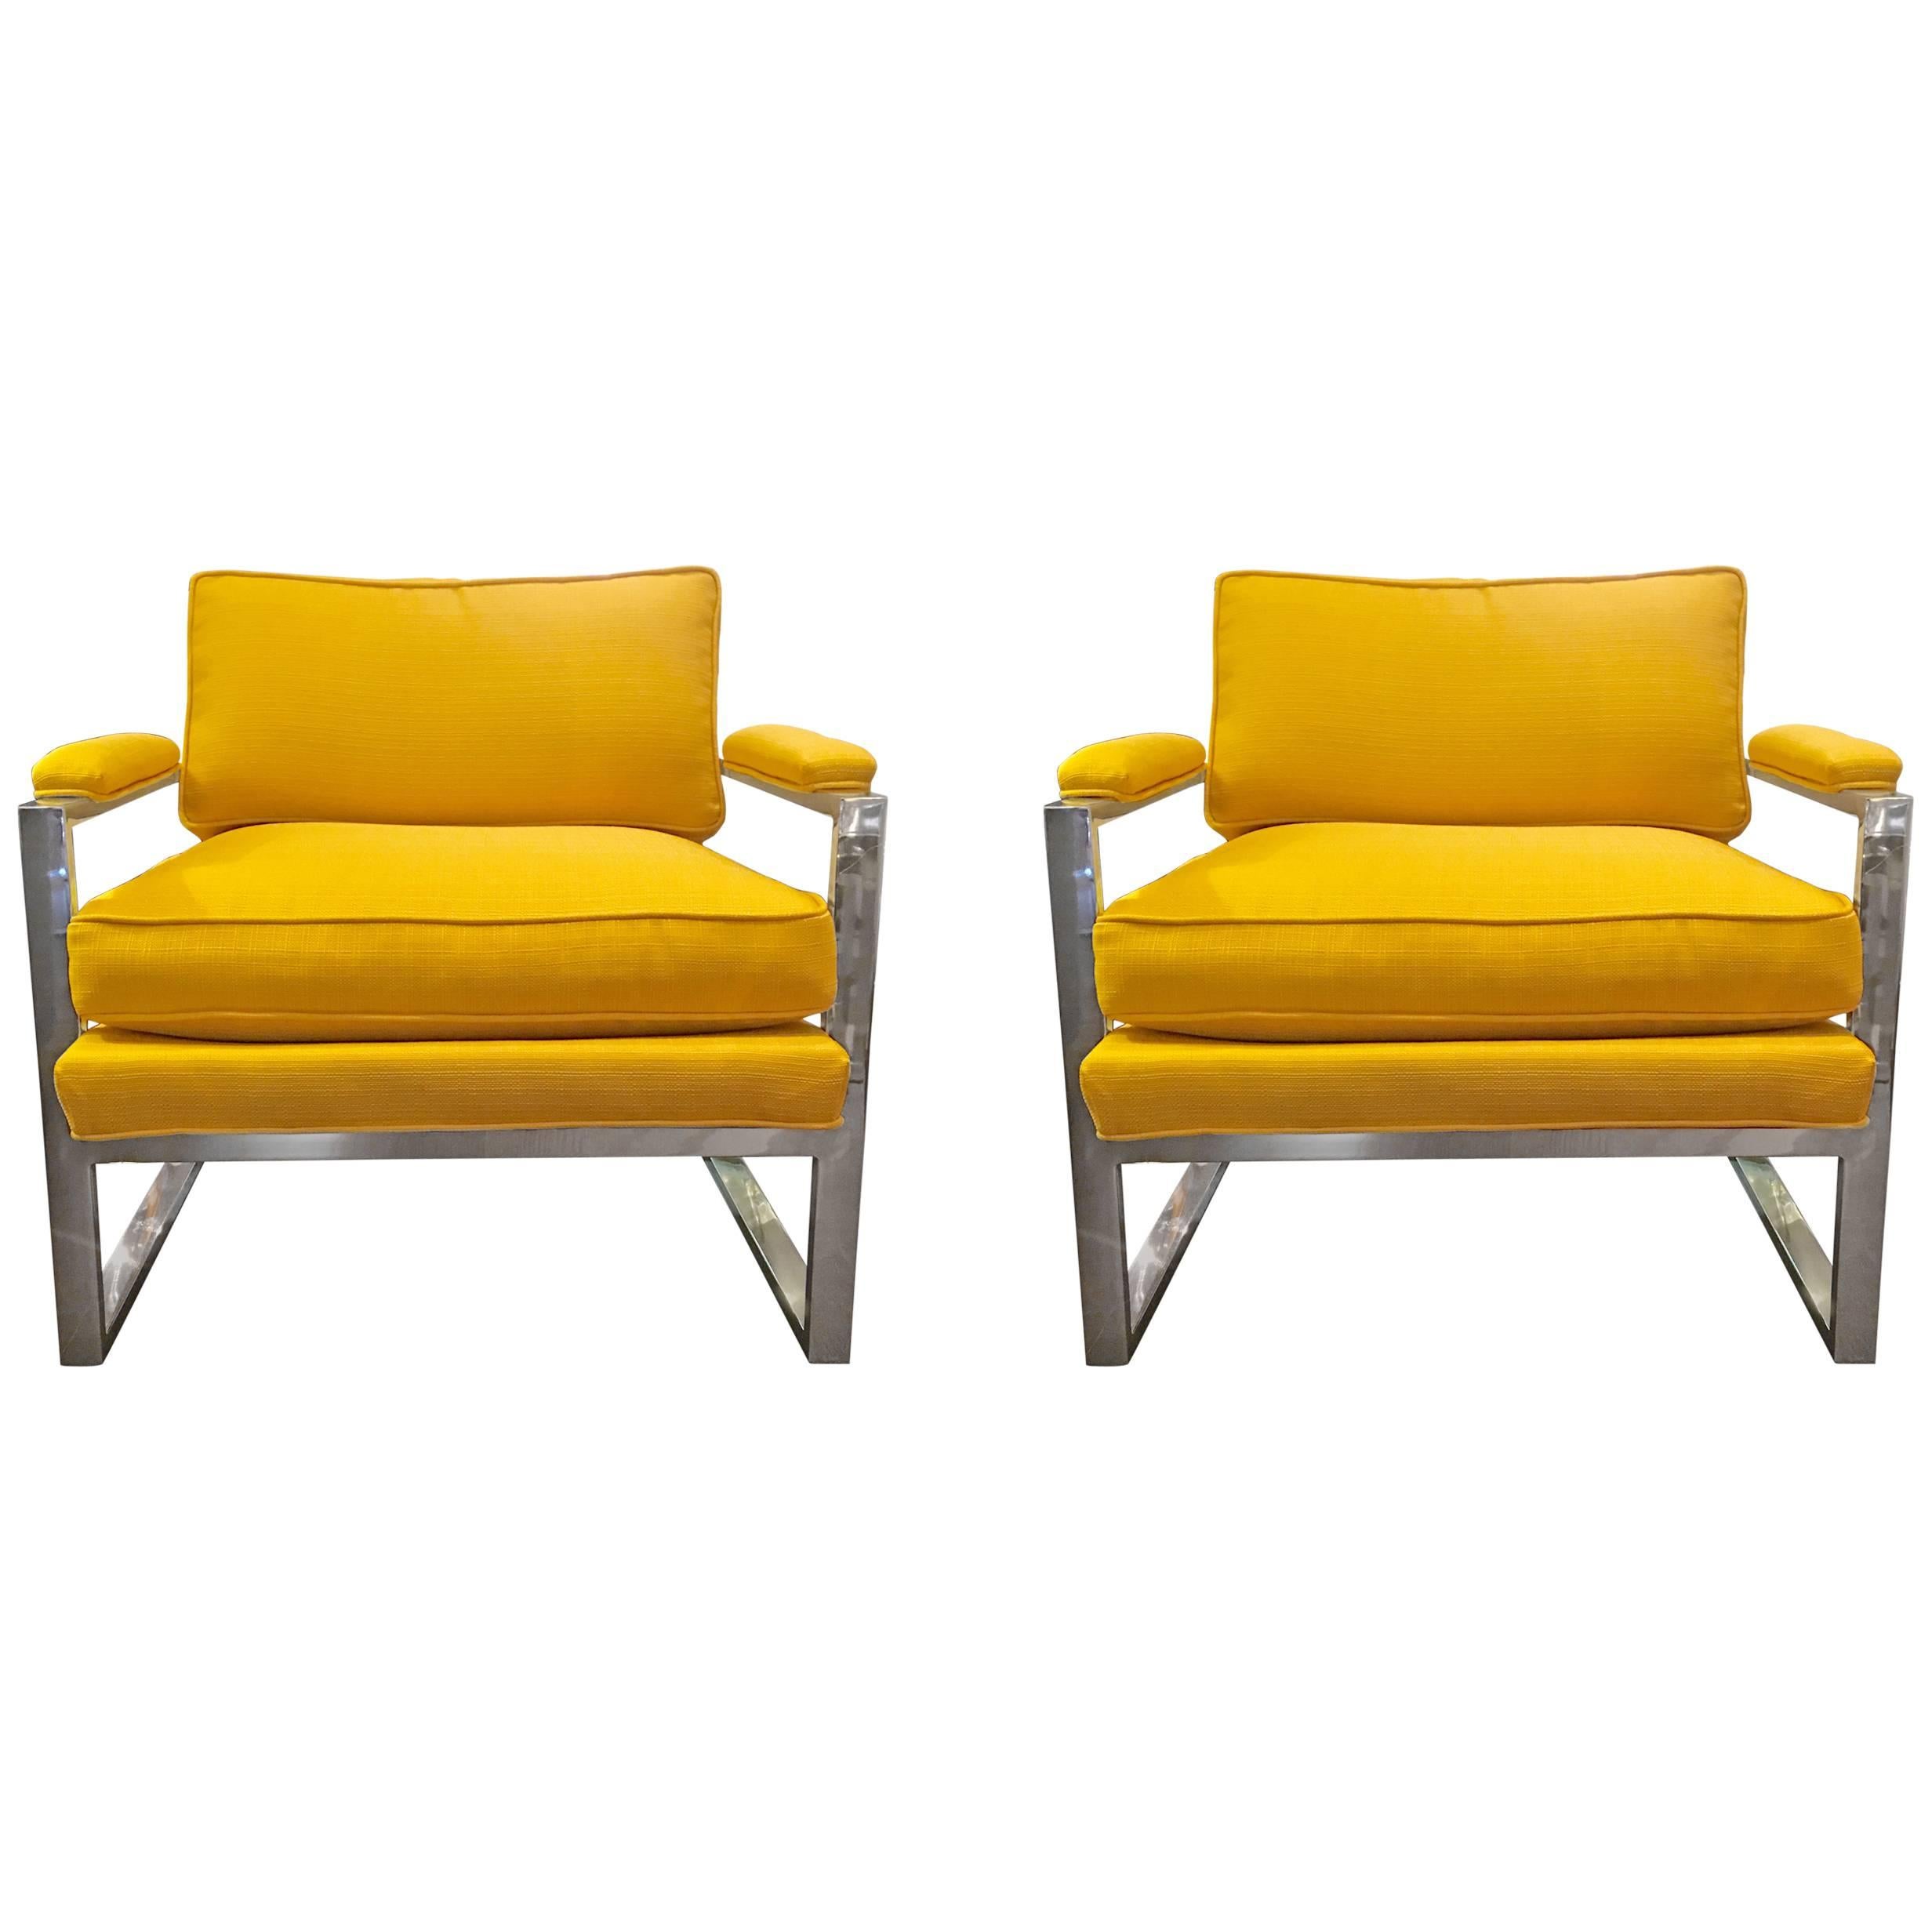 Pair of Milo Baughman Chrome Lounge Chairs For Sale